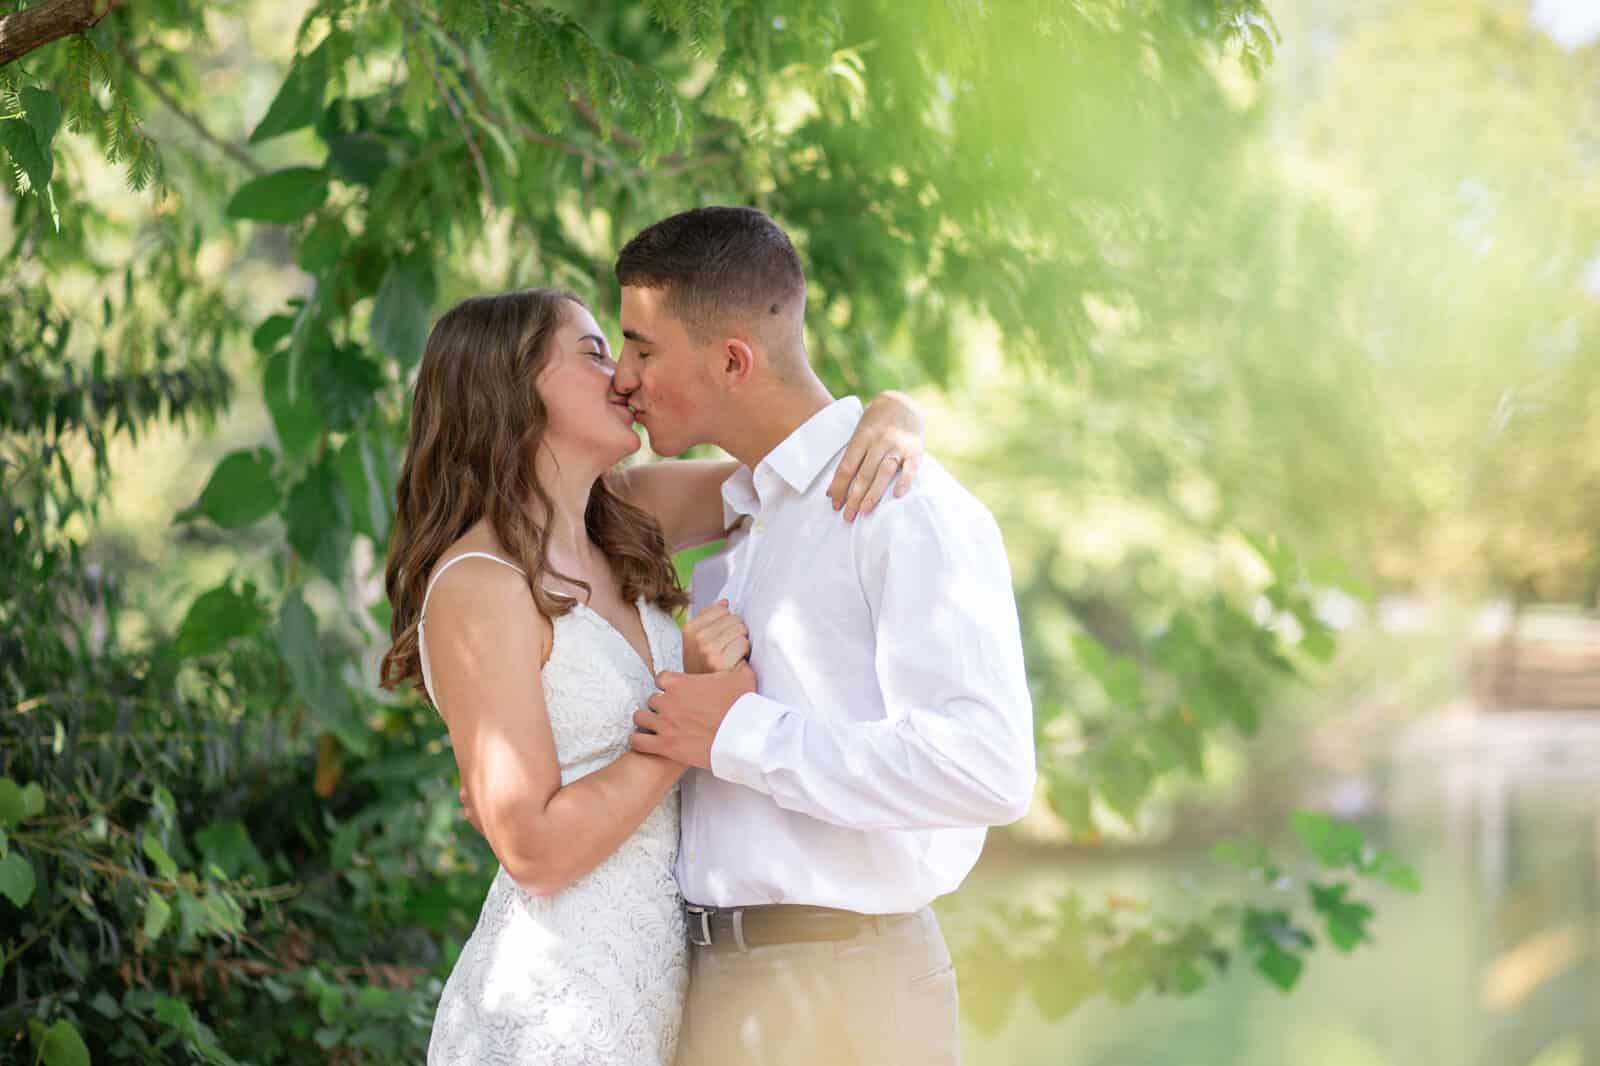 Elopement groom with white cotton shirt and bride with sleeveless lace dress kiss in Centennial Park surrounding by soft sun-filled foliage.